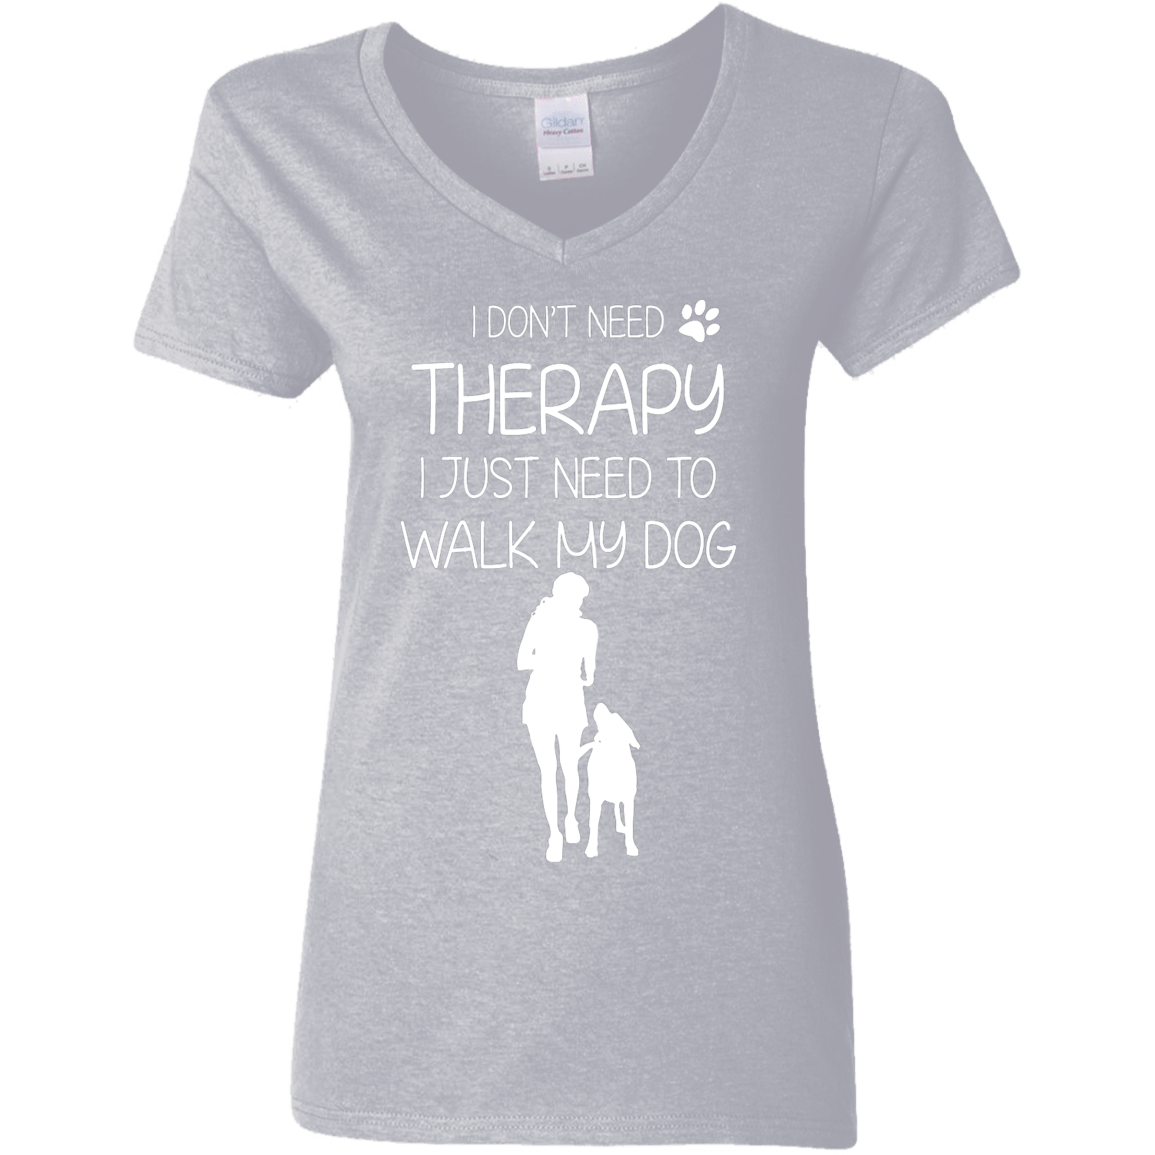 I Don't Need Therapy - Ladies V Neck.